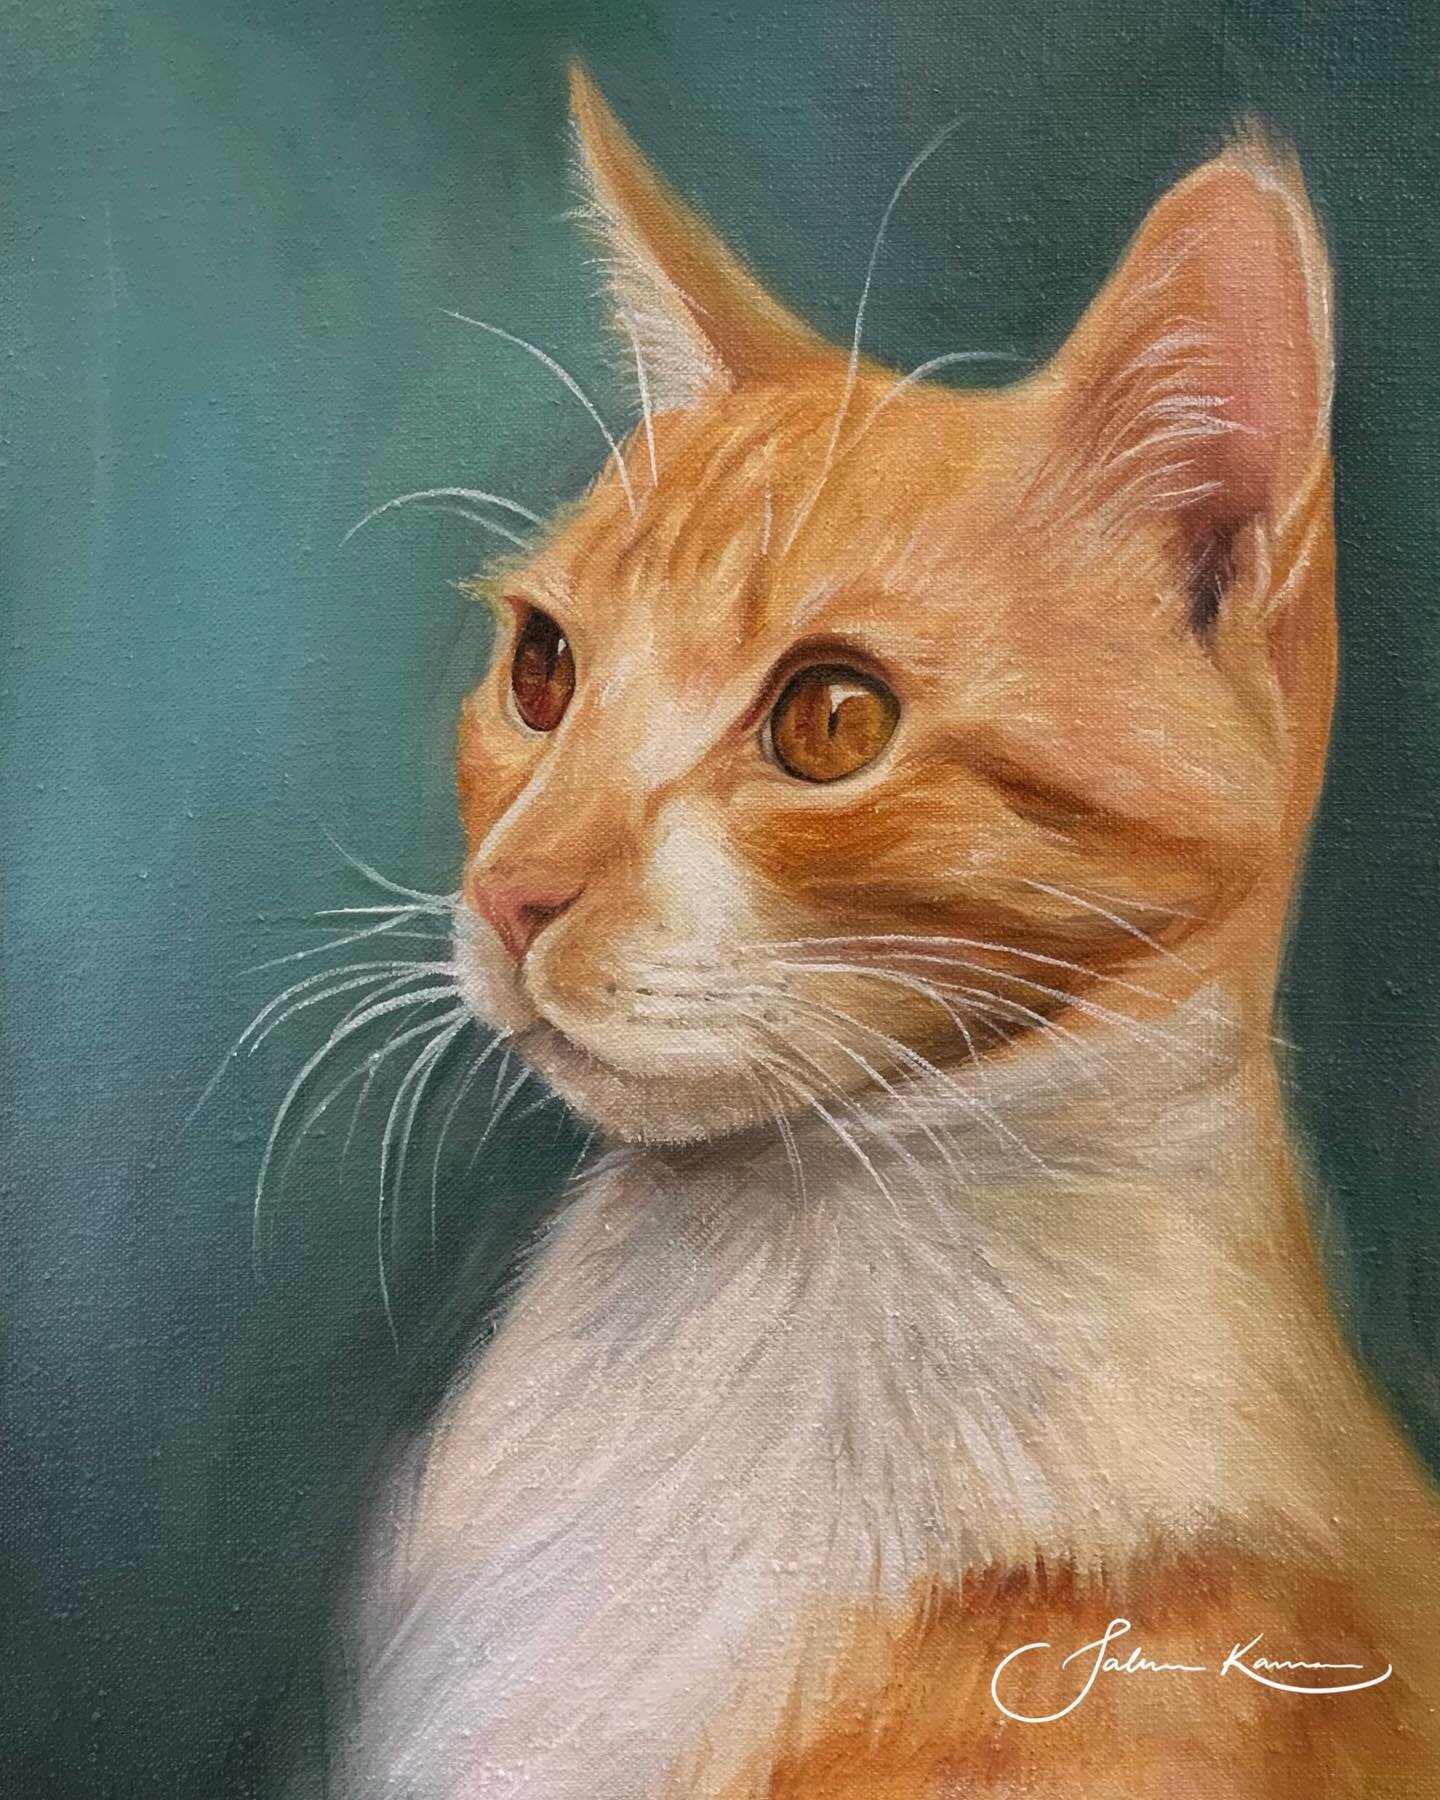 I already posted this on my TikTok (@salmak_art), but here is my first ever oil painting of an animal. Hope you like it!
&bull;
Swipe for the process!
&bull;
&bull;
&bull;
&bull;
&bull;
&bull;
&bull;
&bull;
&bull;
#illustration #cat #animal #pet #bla